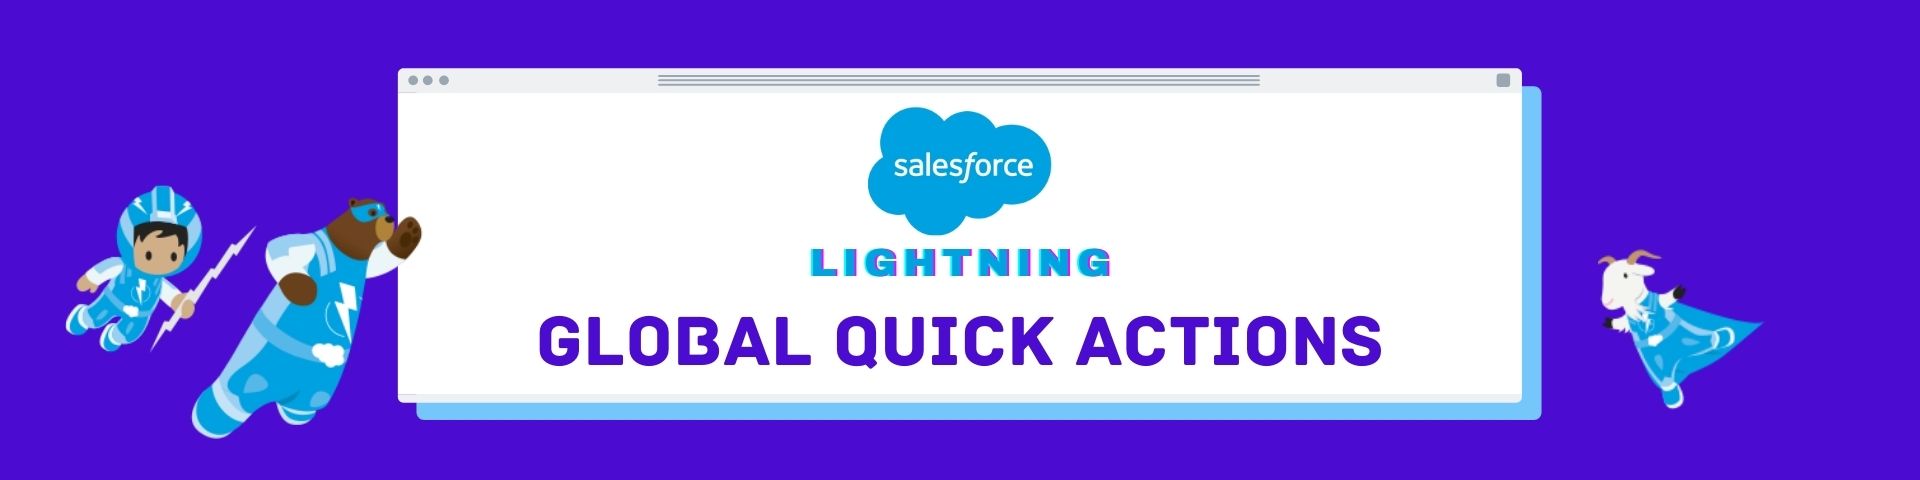 Salesforce Lightning Global quick actions